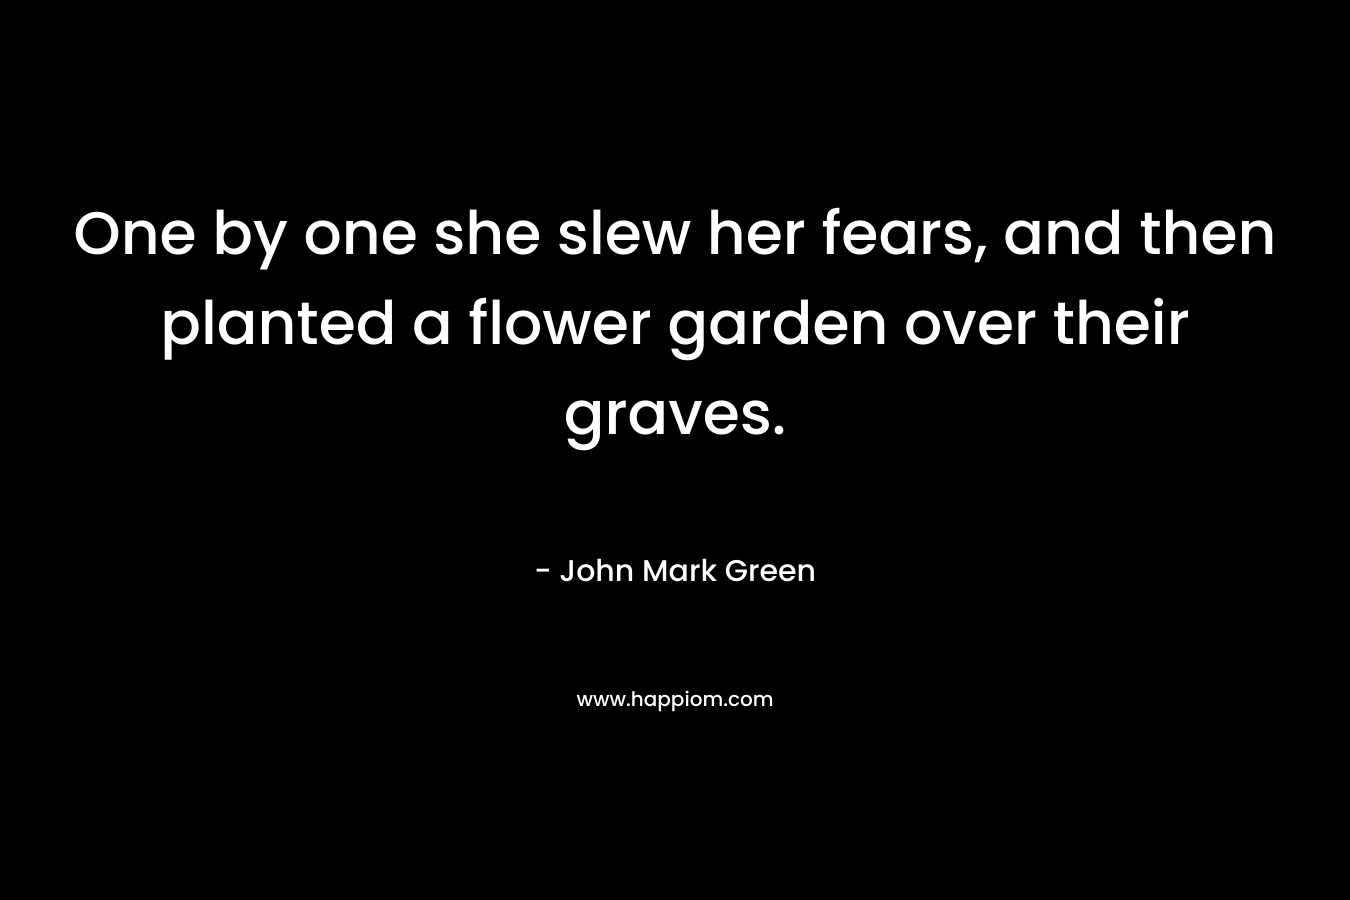 One by one she slew her fears, and then planted a flower garden over their graves. – John Mark Green